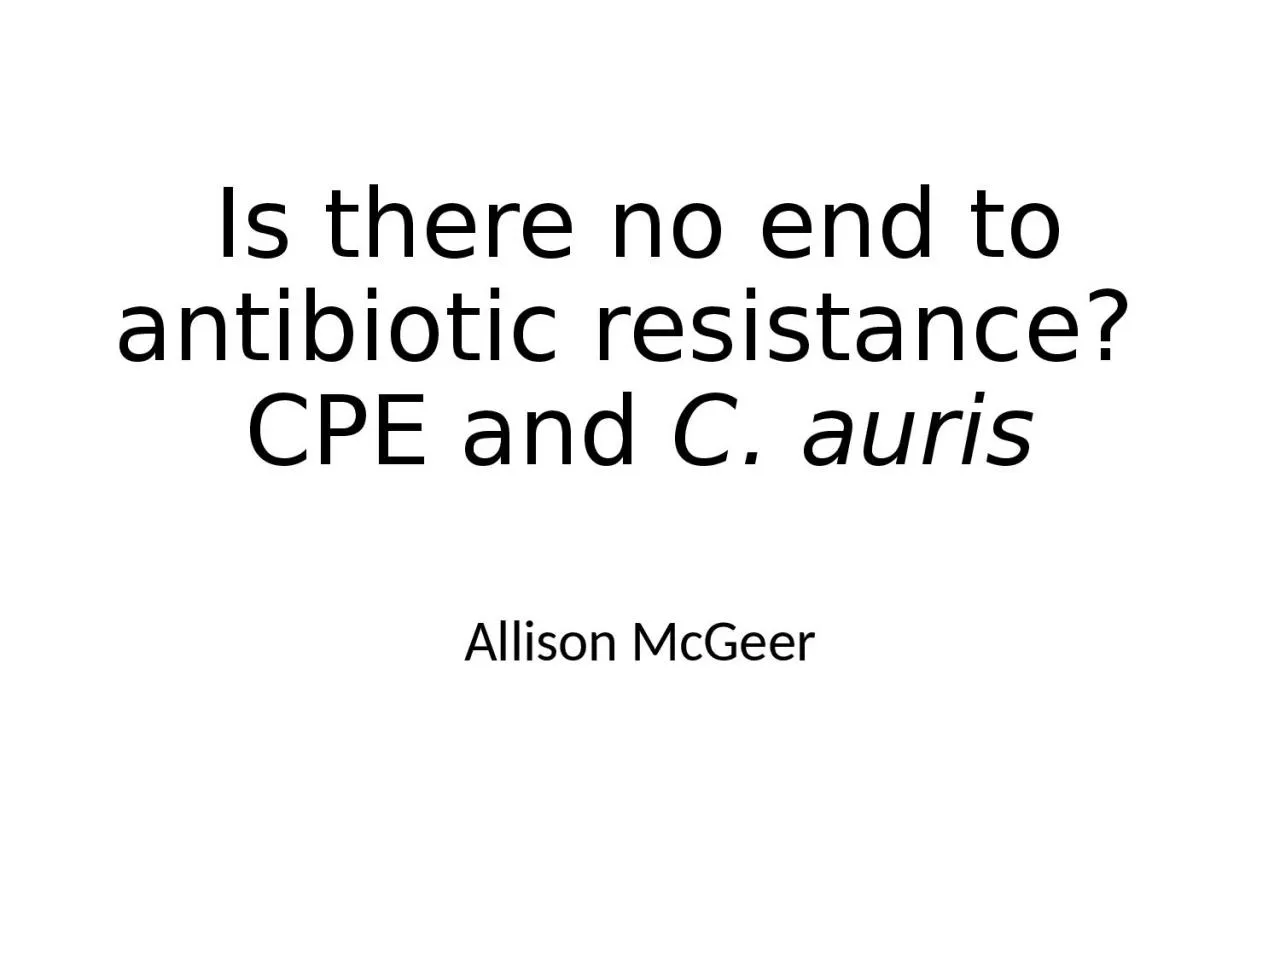 Is there no end to antibiotic resistance?